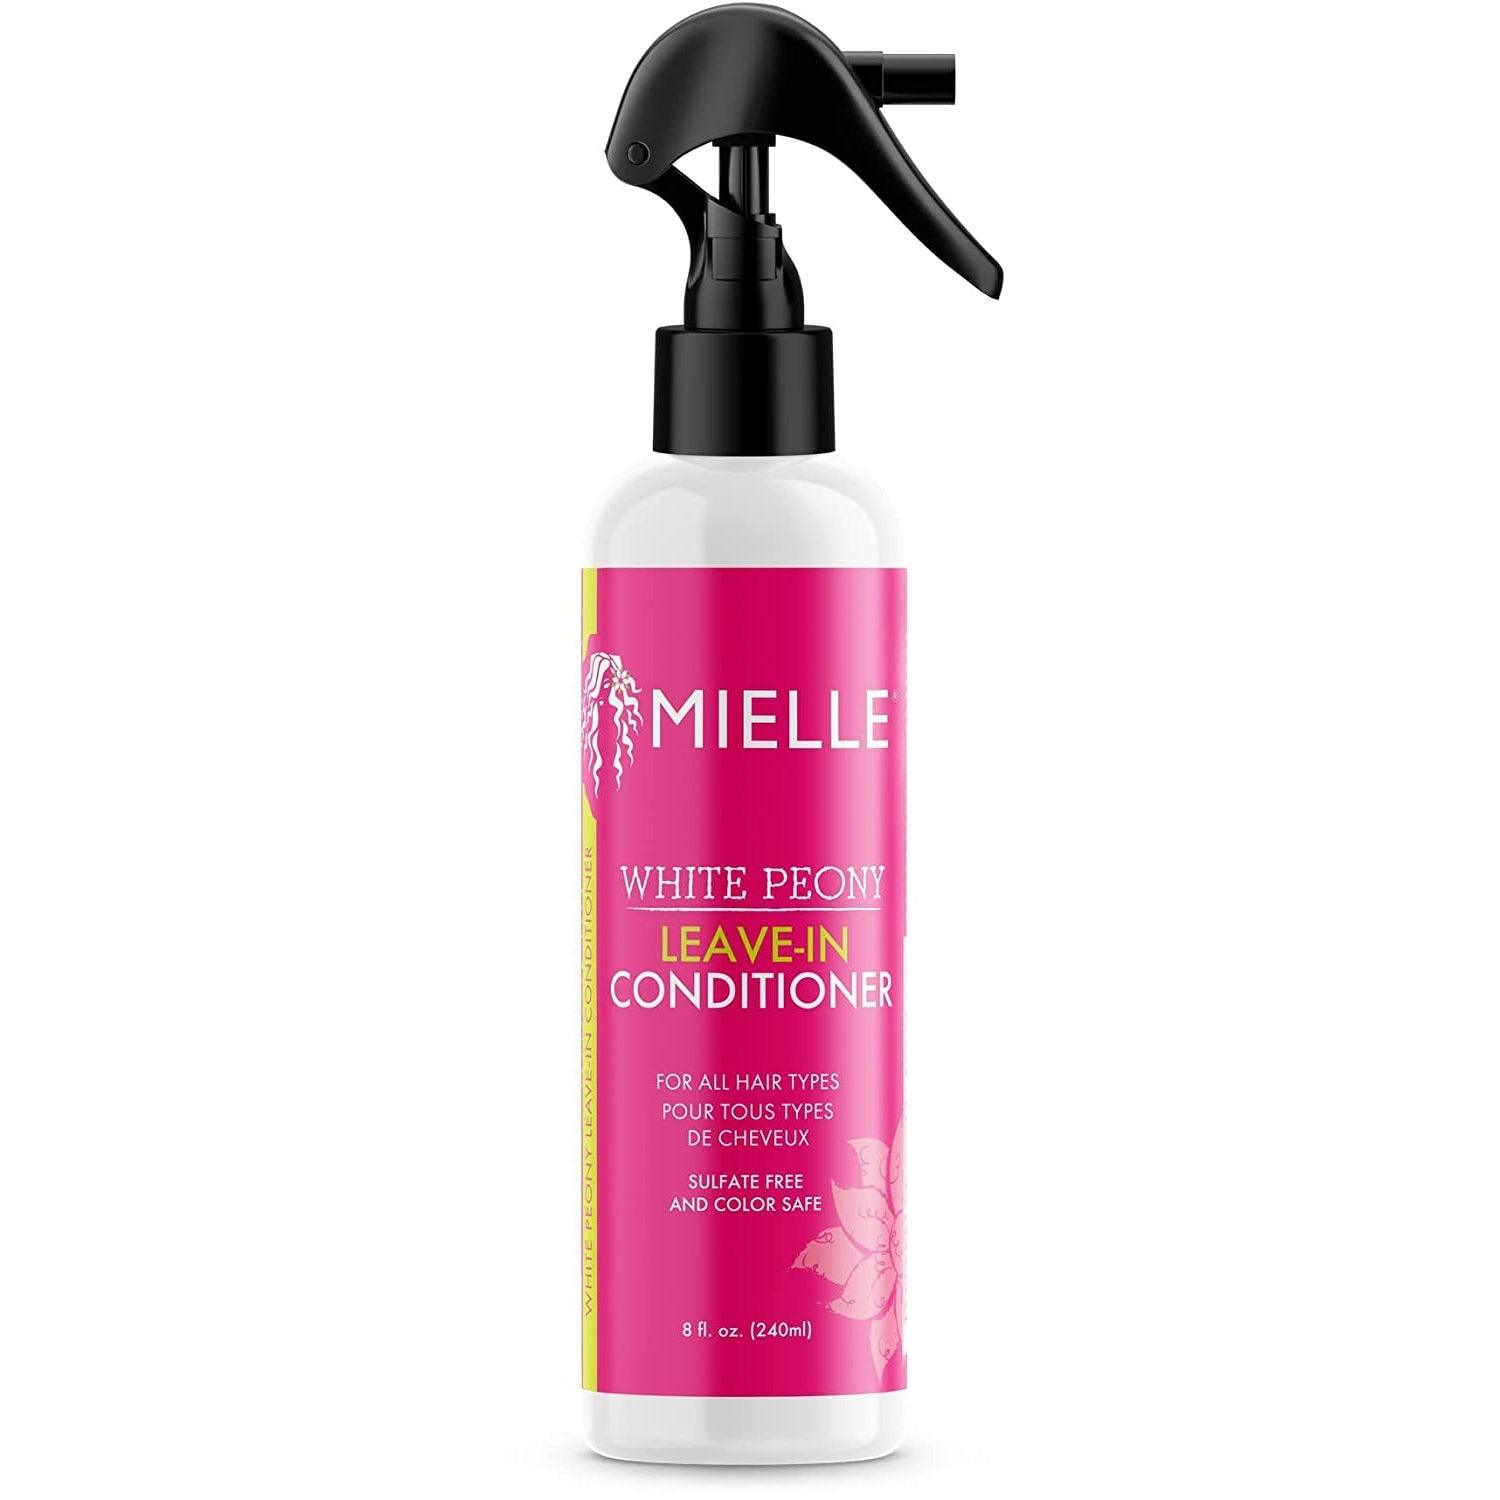 Mielle Organics White Peony Sulfate-Free Leave-In Conditioner, Color Safe, 8 Ounces - African Beauty Online